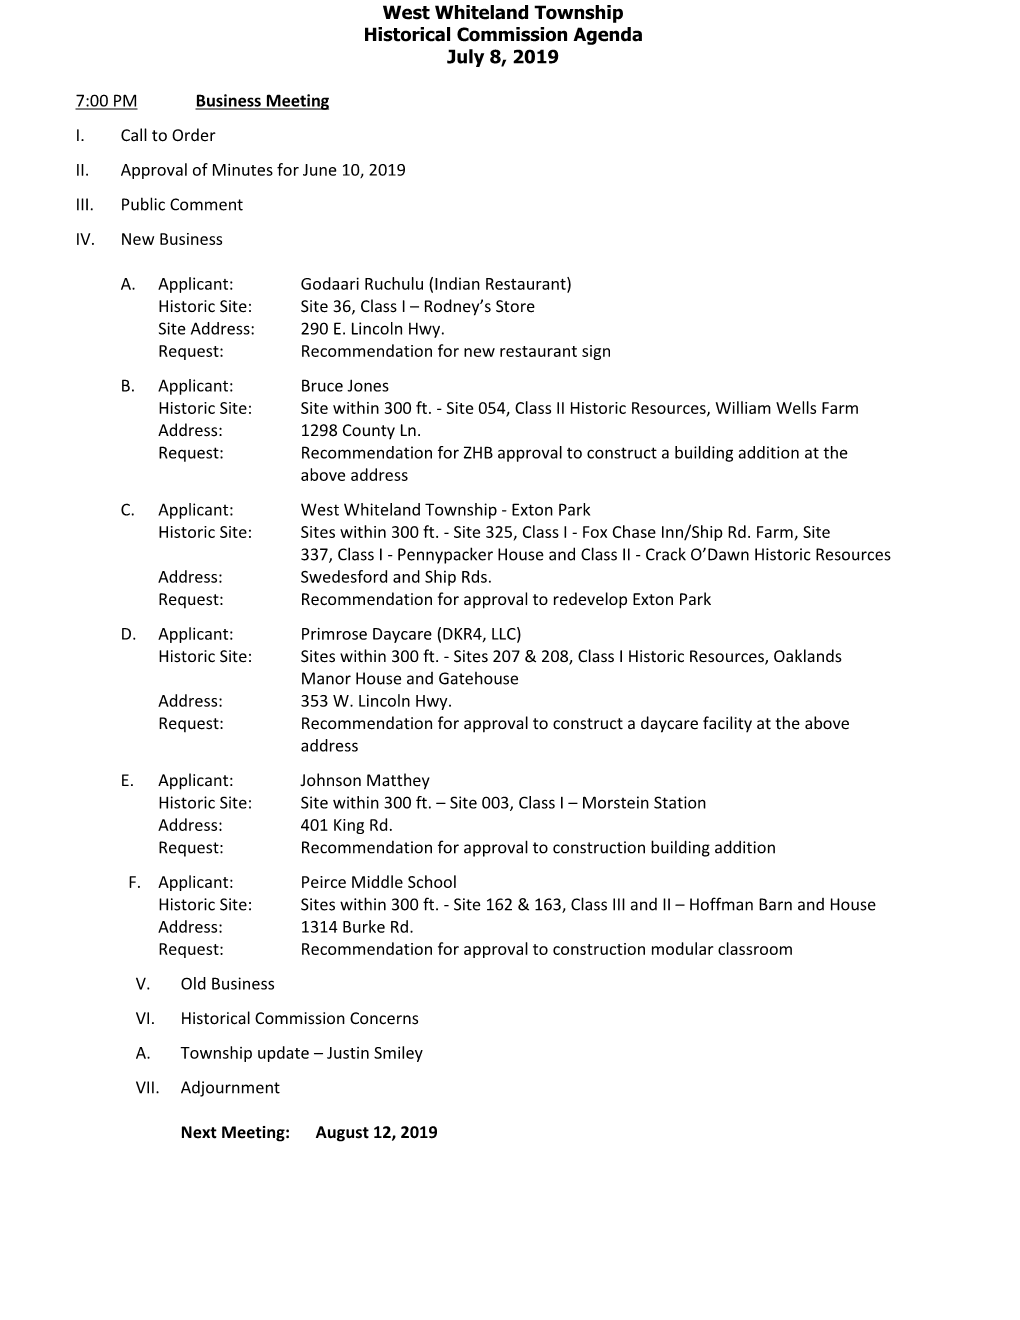 West Whiteland Township Historical Commission Agenda July 8, 2019 7:00 PM Business Meeting I. Call to Order II. Approval of Minu